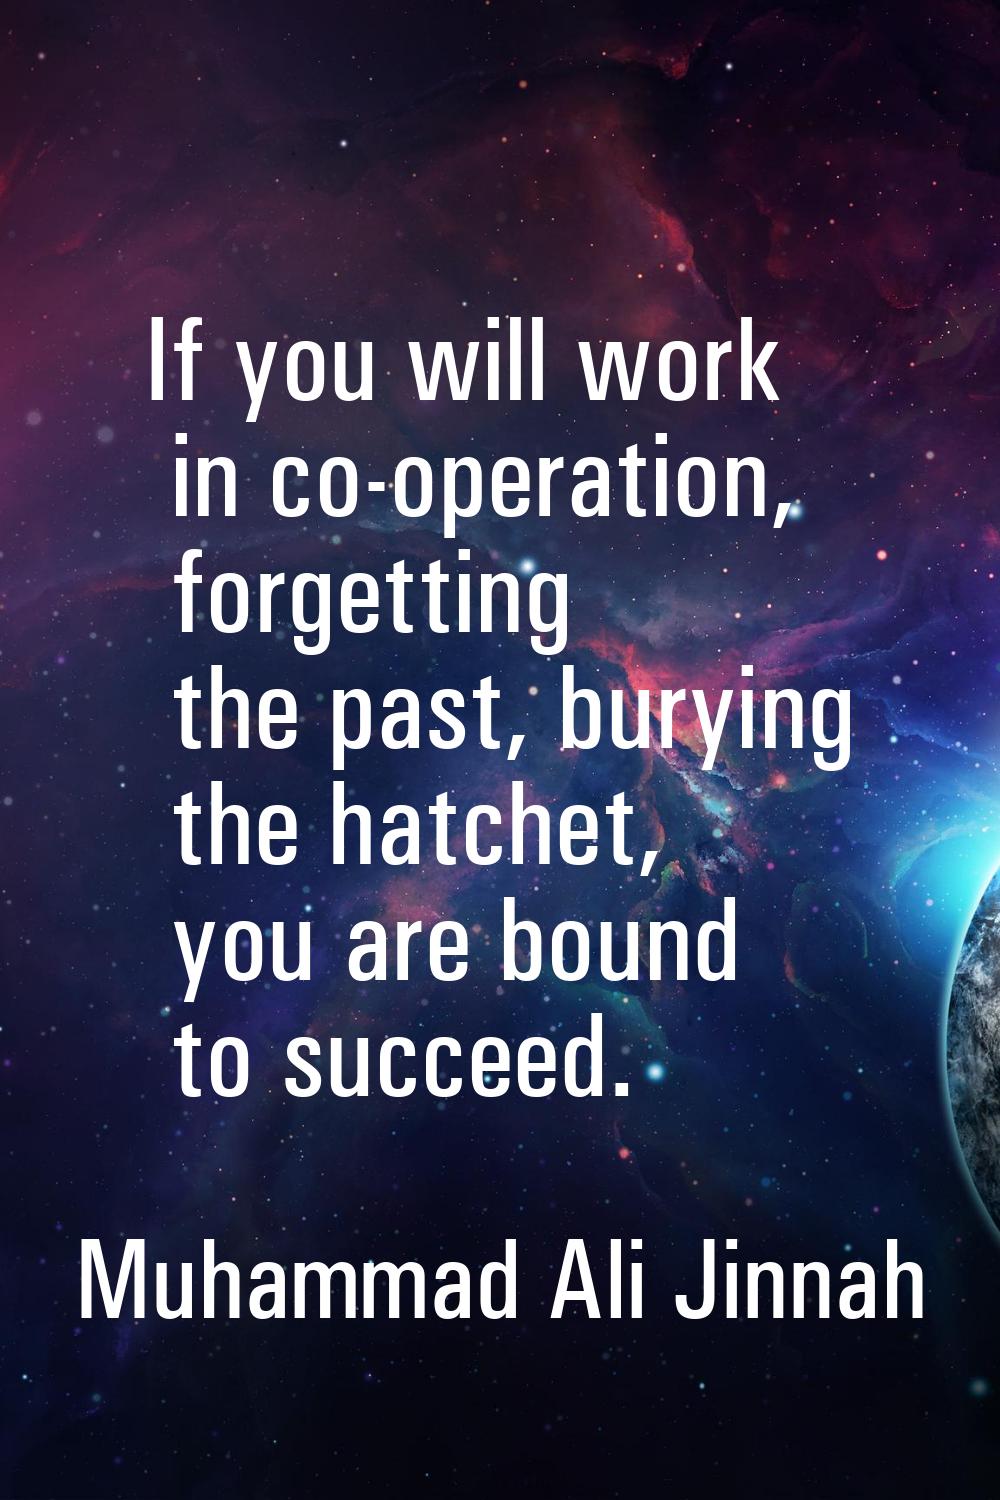 If you will work in co-operation, forgetting the past, burying the hatchet, you are bound to succee